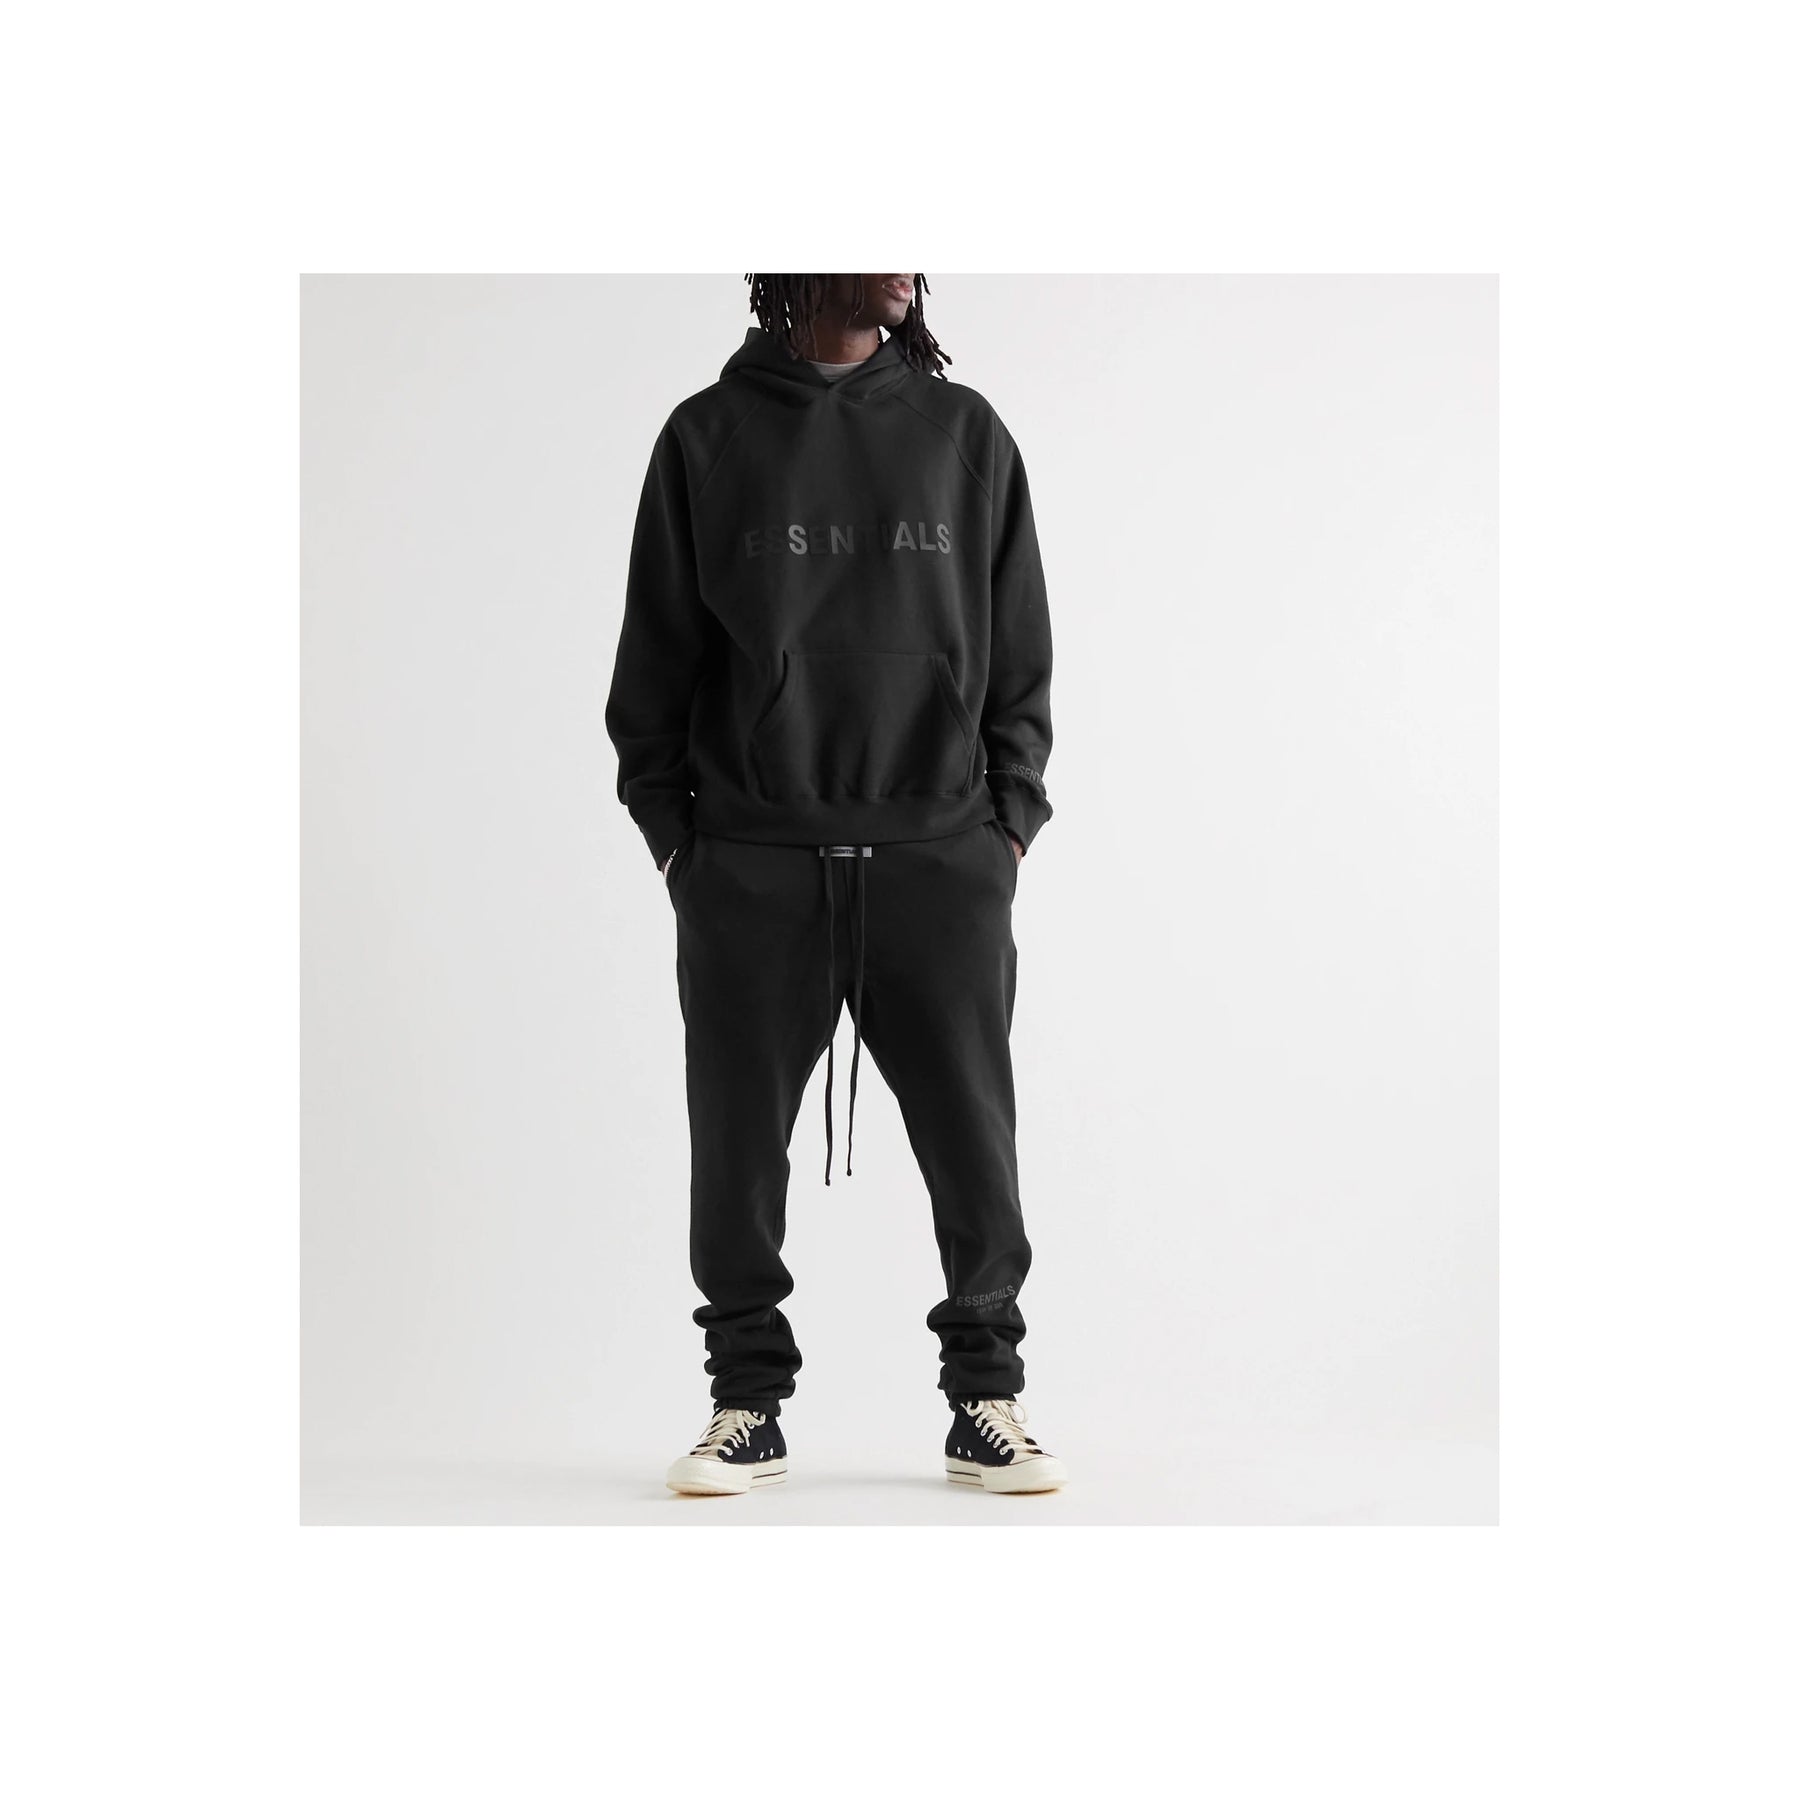 Fear of God Essentials 3D Silicon Applique Pullover Hoodie